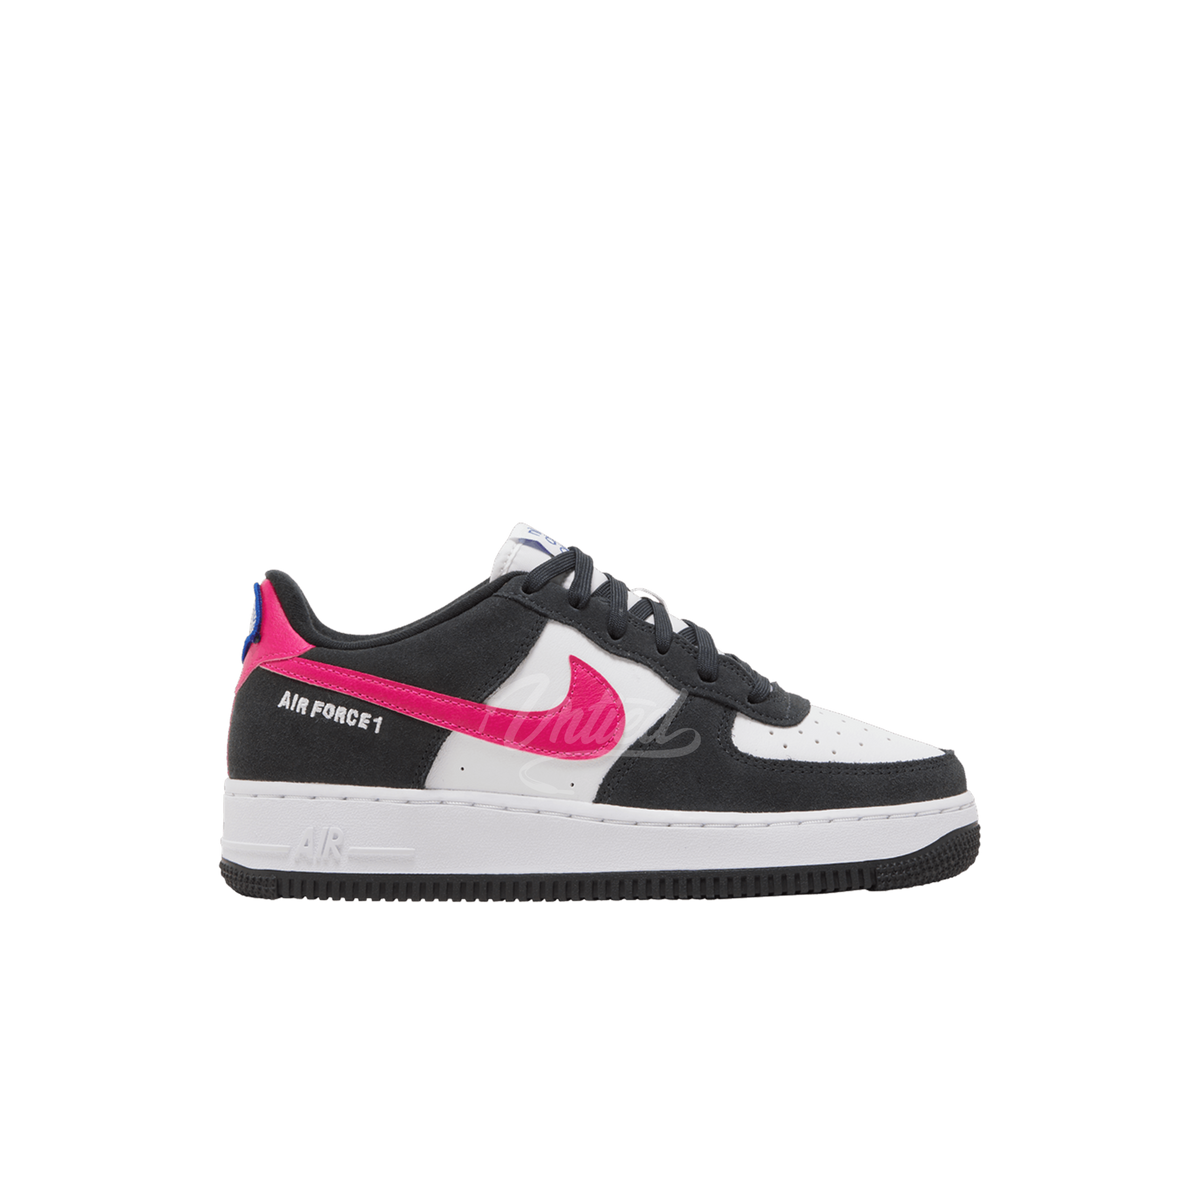 Air Force 1 "Athletic Club Prime Pink" (GS)